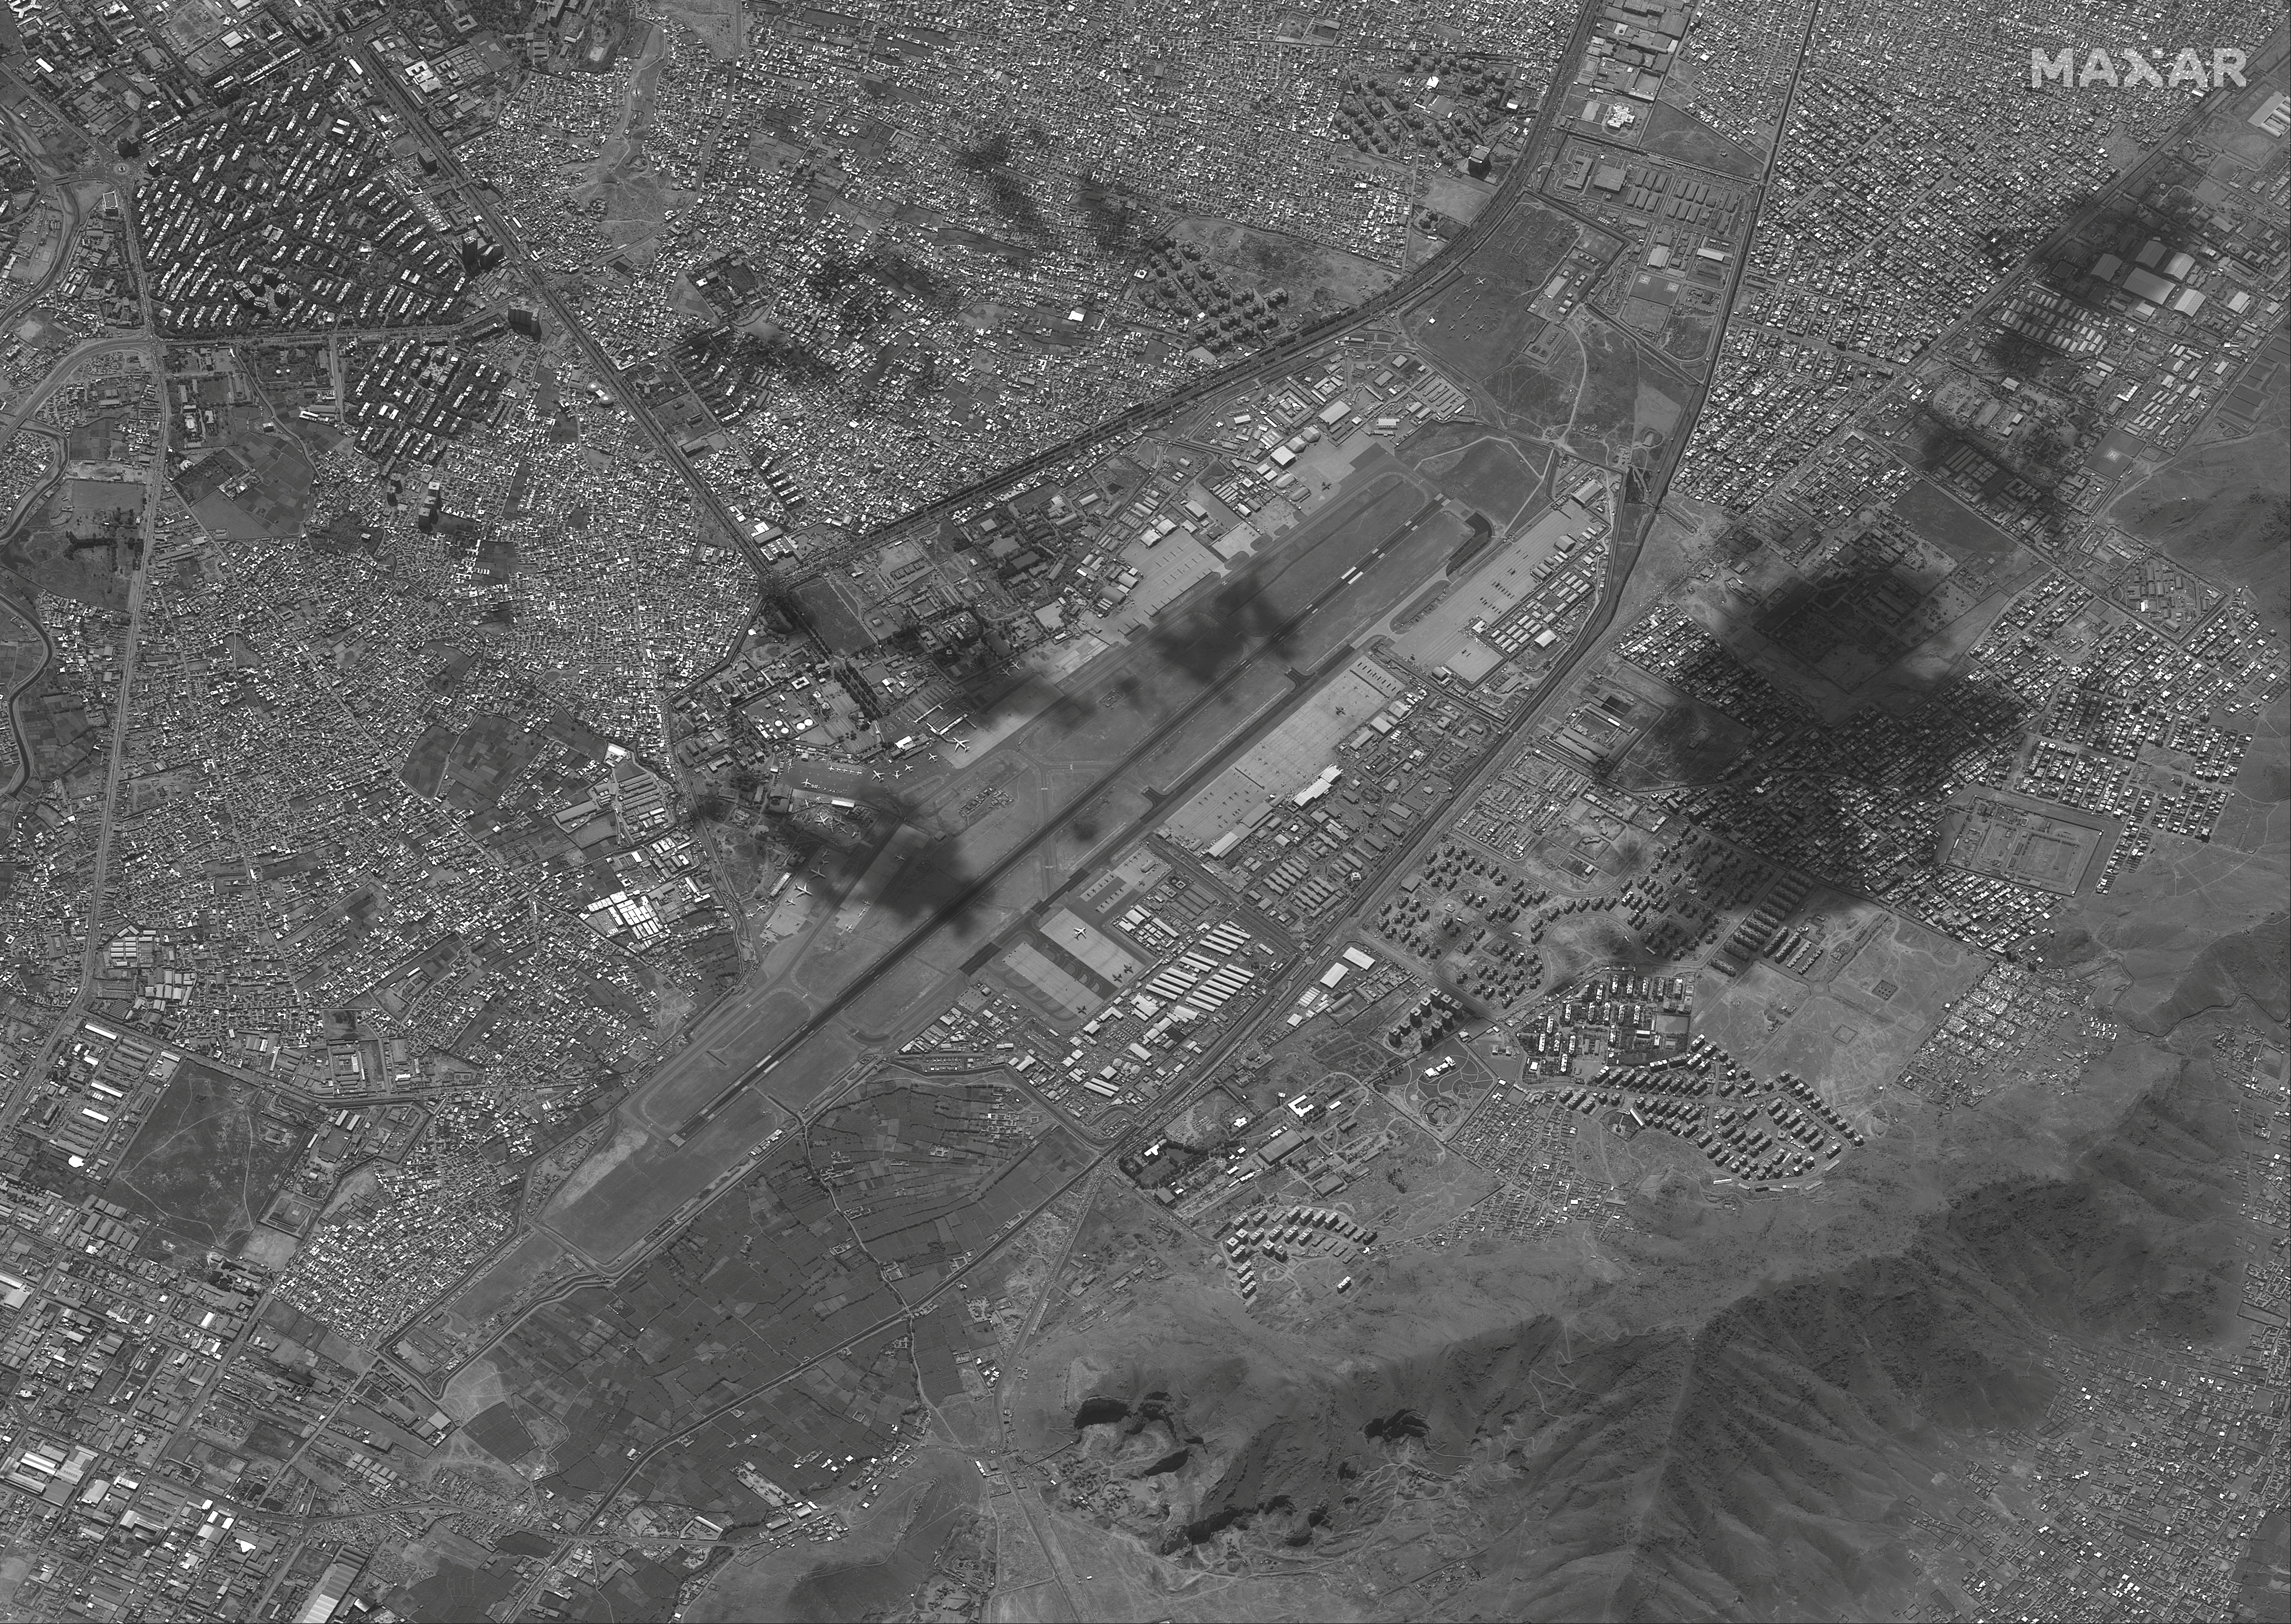 Overview of the Hamid Karzai International Airport in Kabul